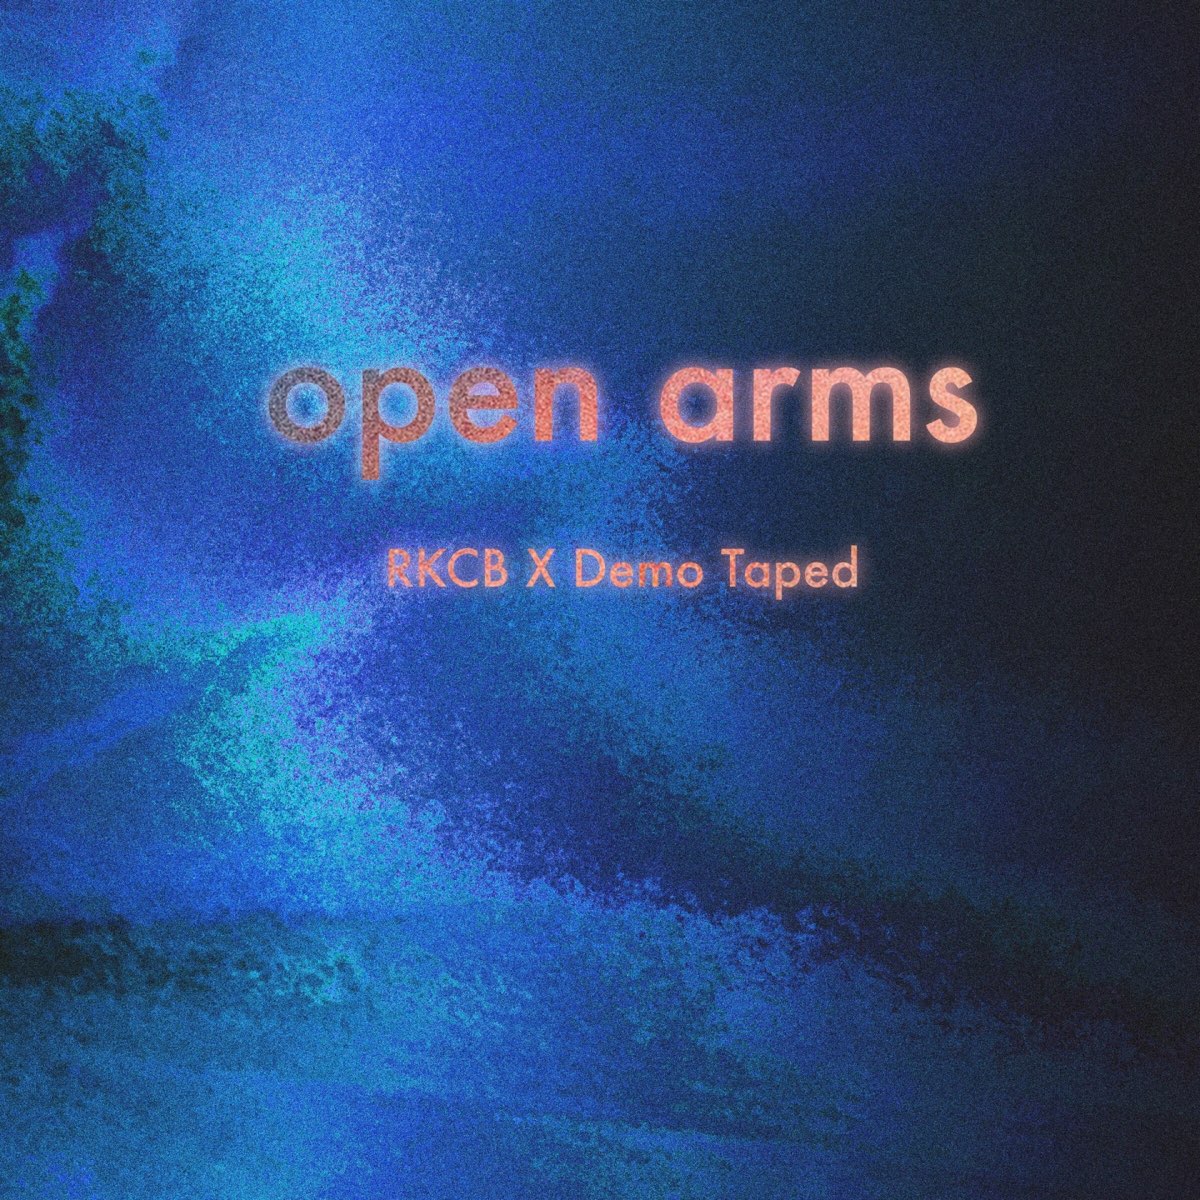 Open Arms обложка. Demo Tape August. Opening Tape. Open Arms tears. Demo tapes